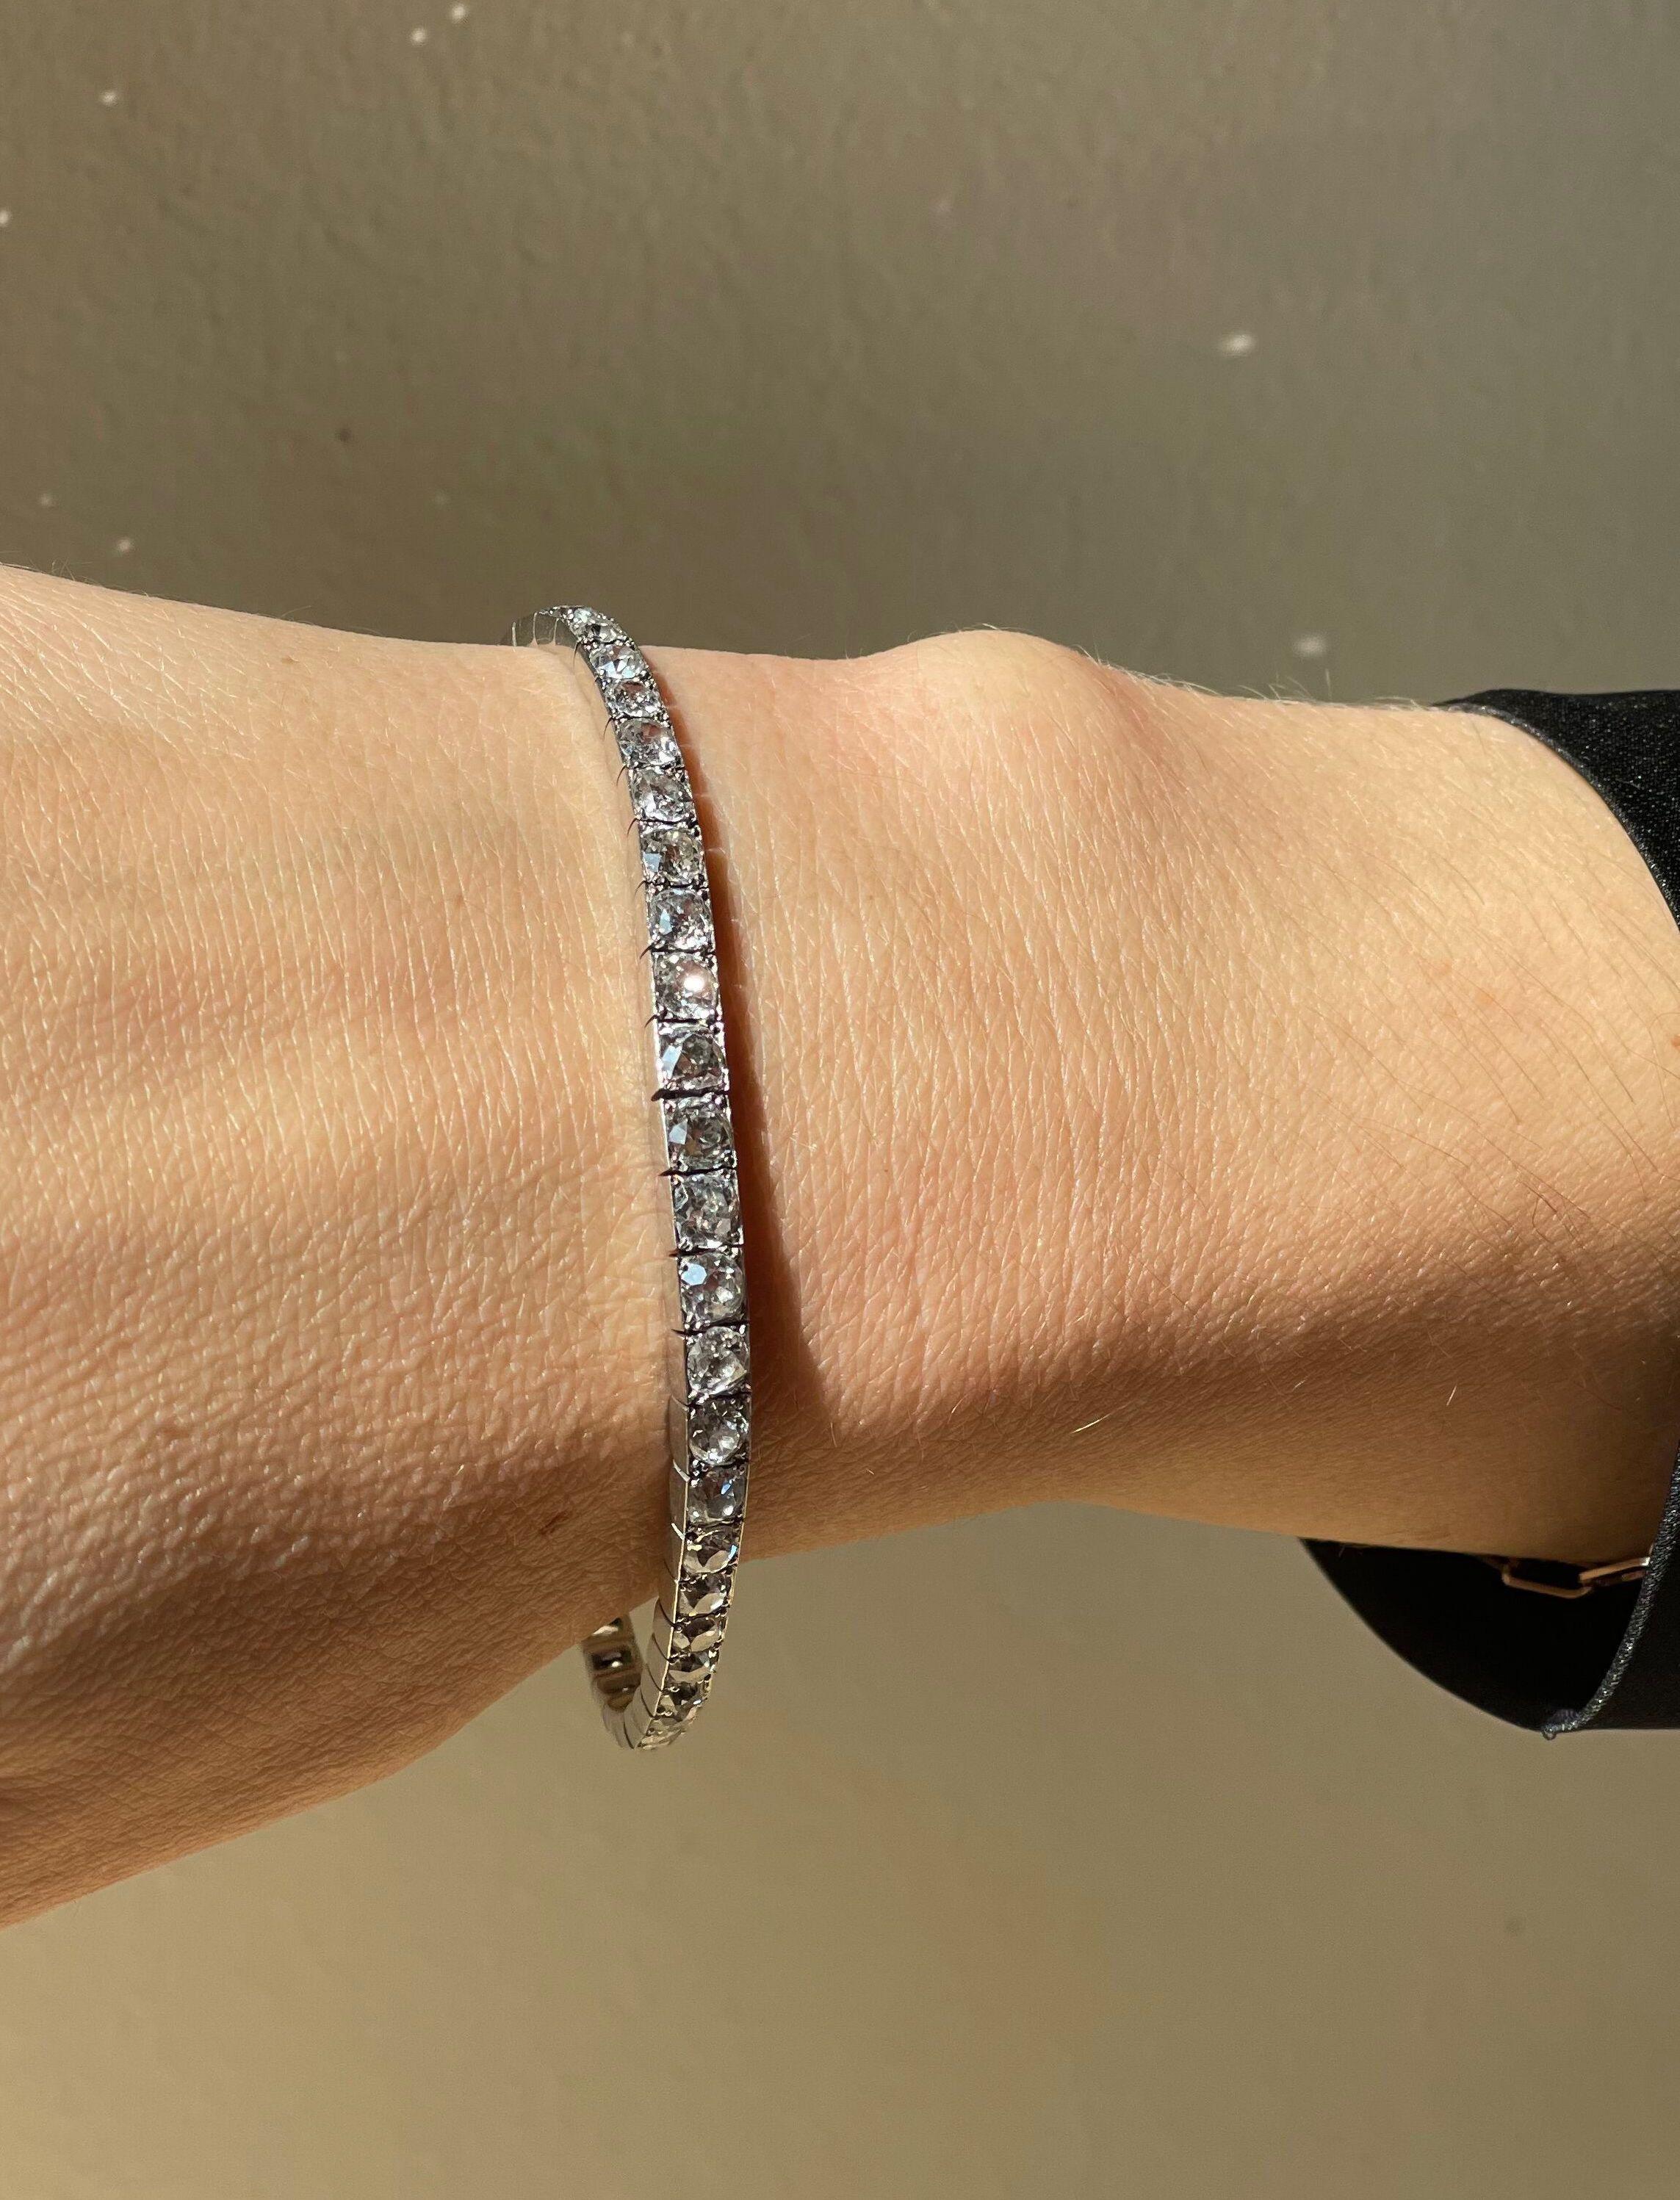 Iconic Art Deco platinum tennis bracelet, crafted by Cartier Paris, set with graduated in size old mine cut diamonds - total approx. 5cts G/VS-Si. Bracelet is 7 1/8